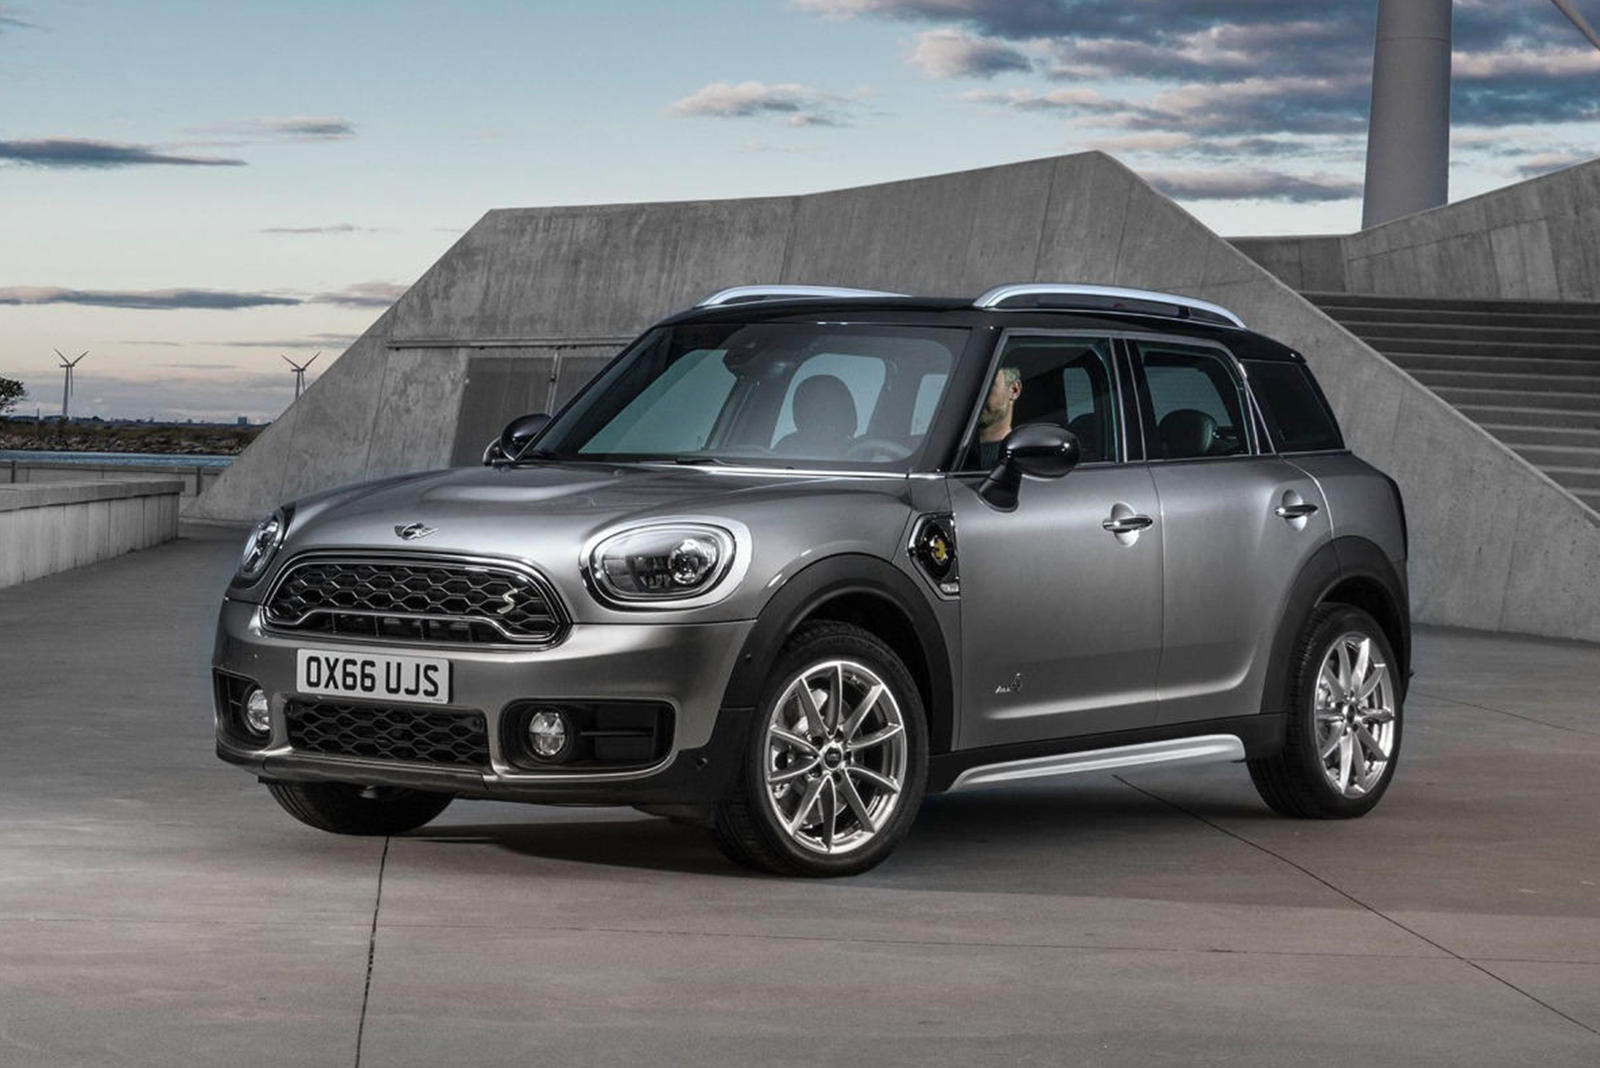 2019 Mini Cooper Countryman Plug-in Hybrid Review, Trims, Specs and